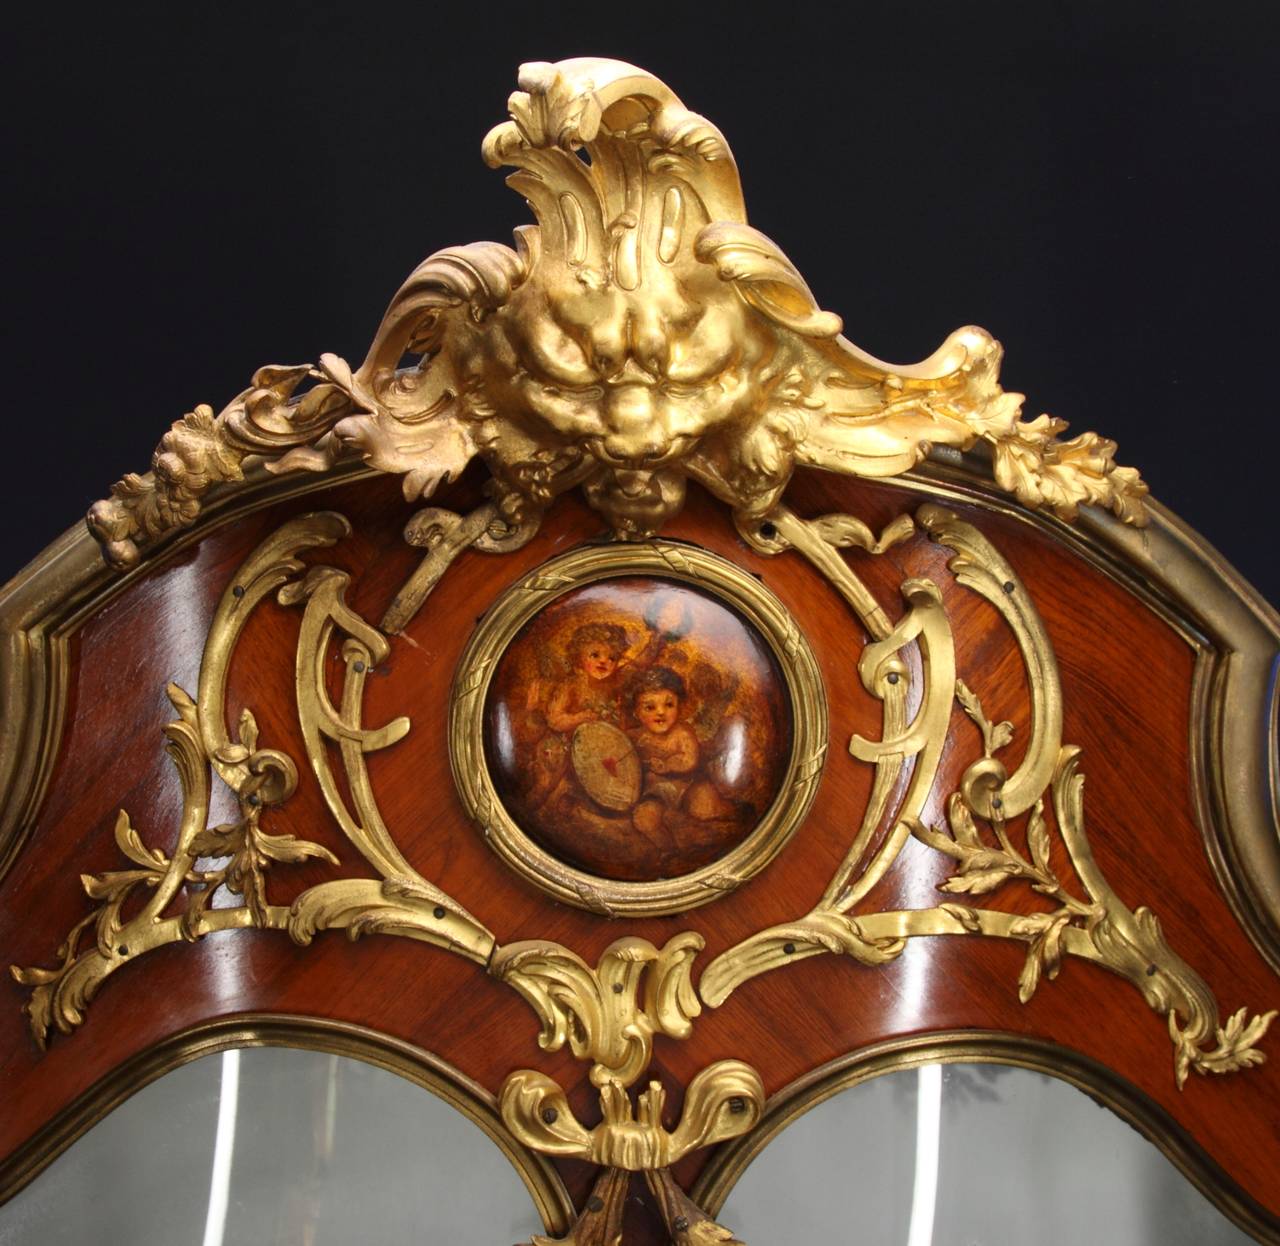 A Very Fine French 19th Century Ormolu-Mounted Louis XV Style Double-Door Vitrine attributed to Francois Linke. The front bombe Vernis Martin panel decorated with a painted scene with two female busts on either side, both doors with marquetry inlay